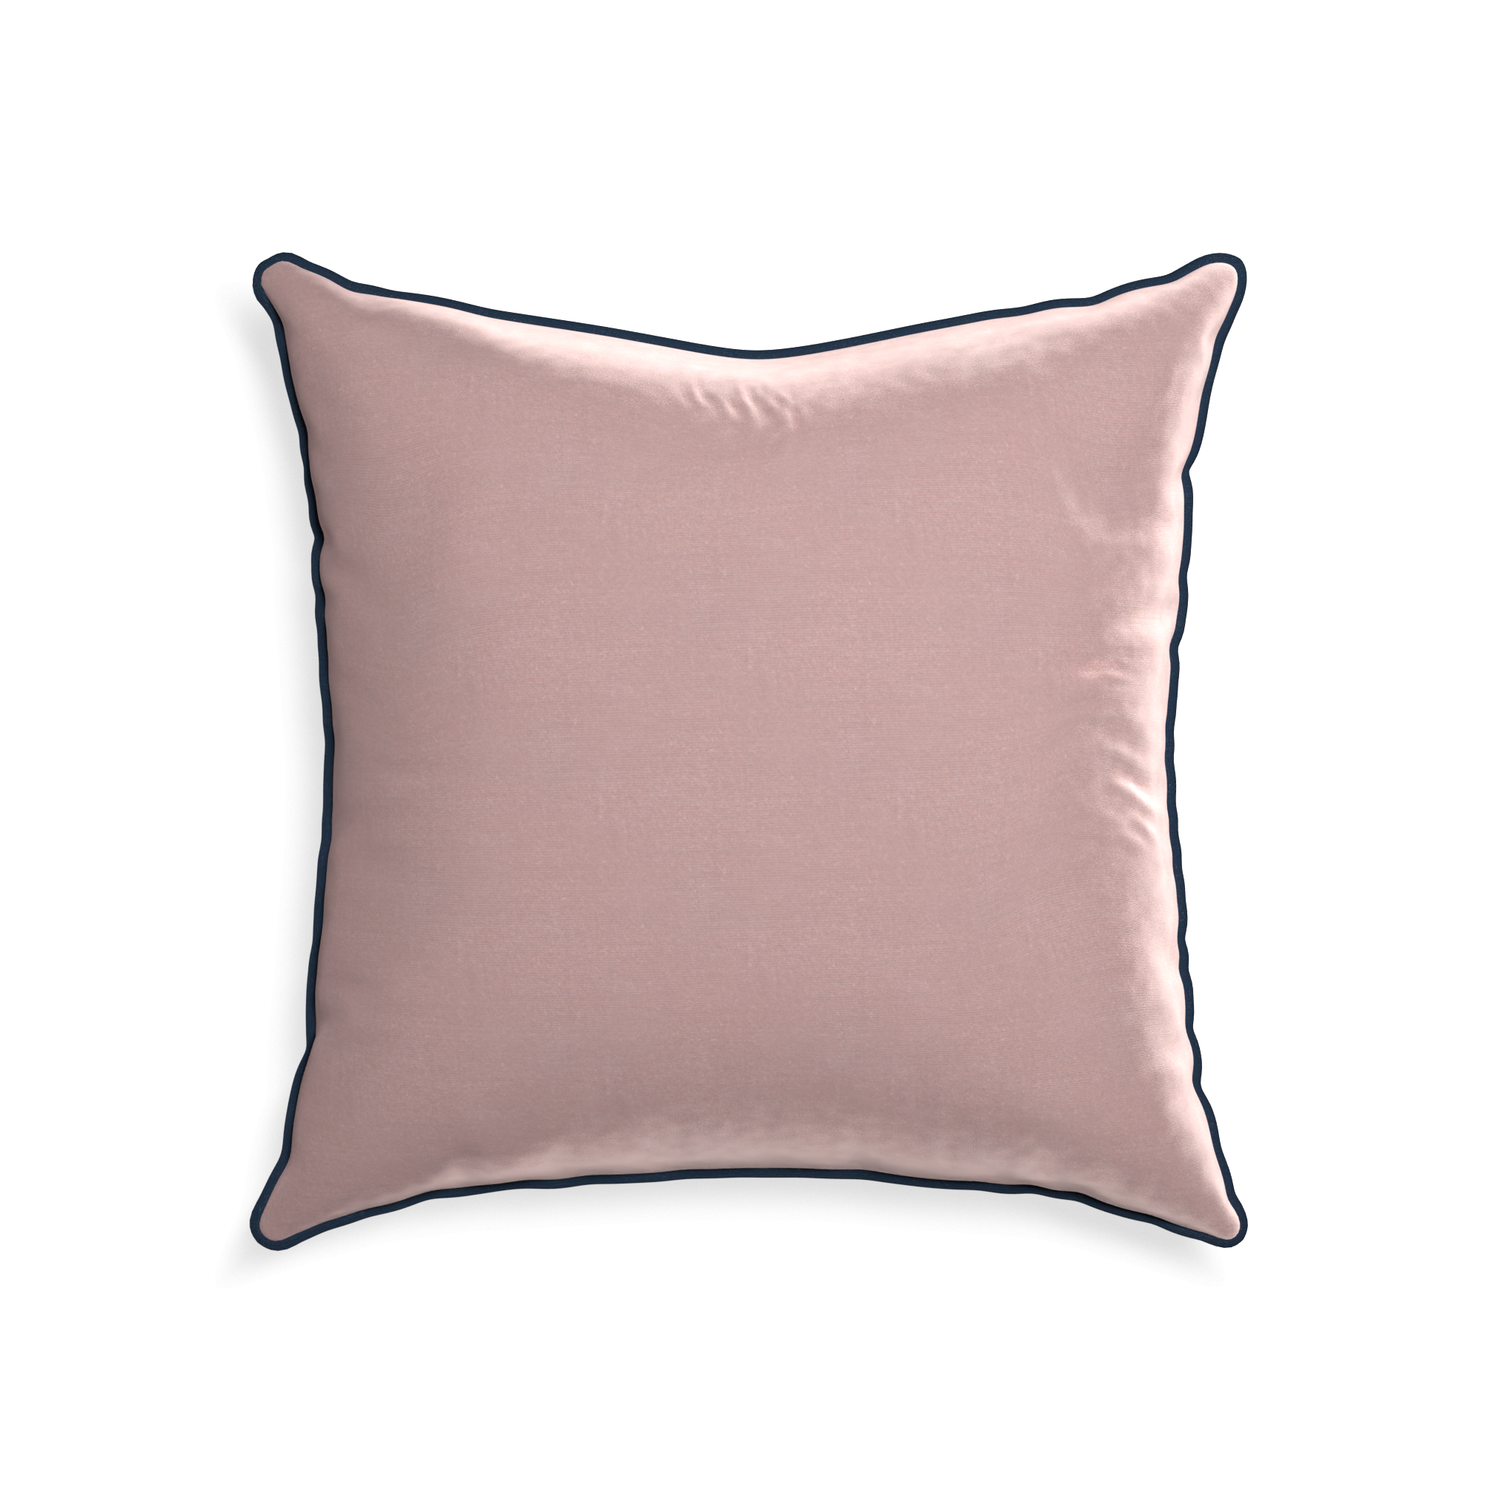 22-square mauve velvet custom mauvepillow with c piping on white background